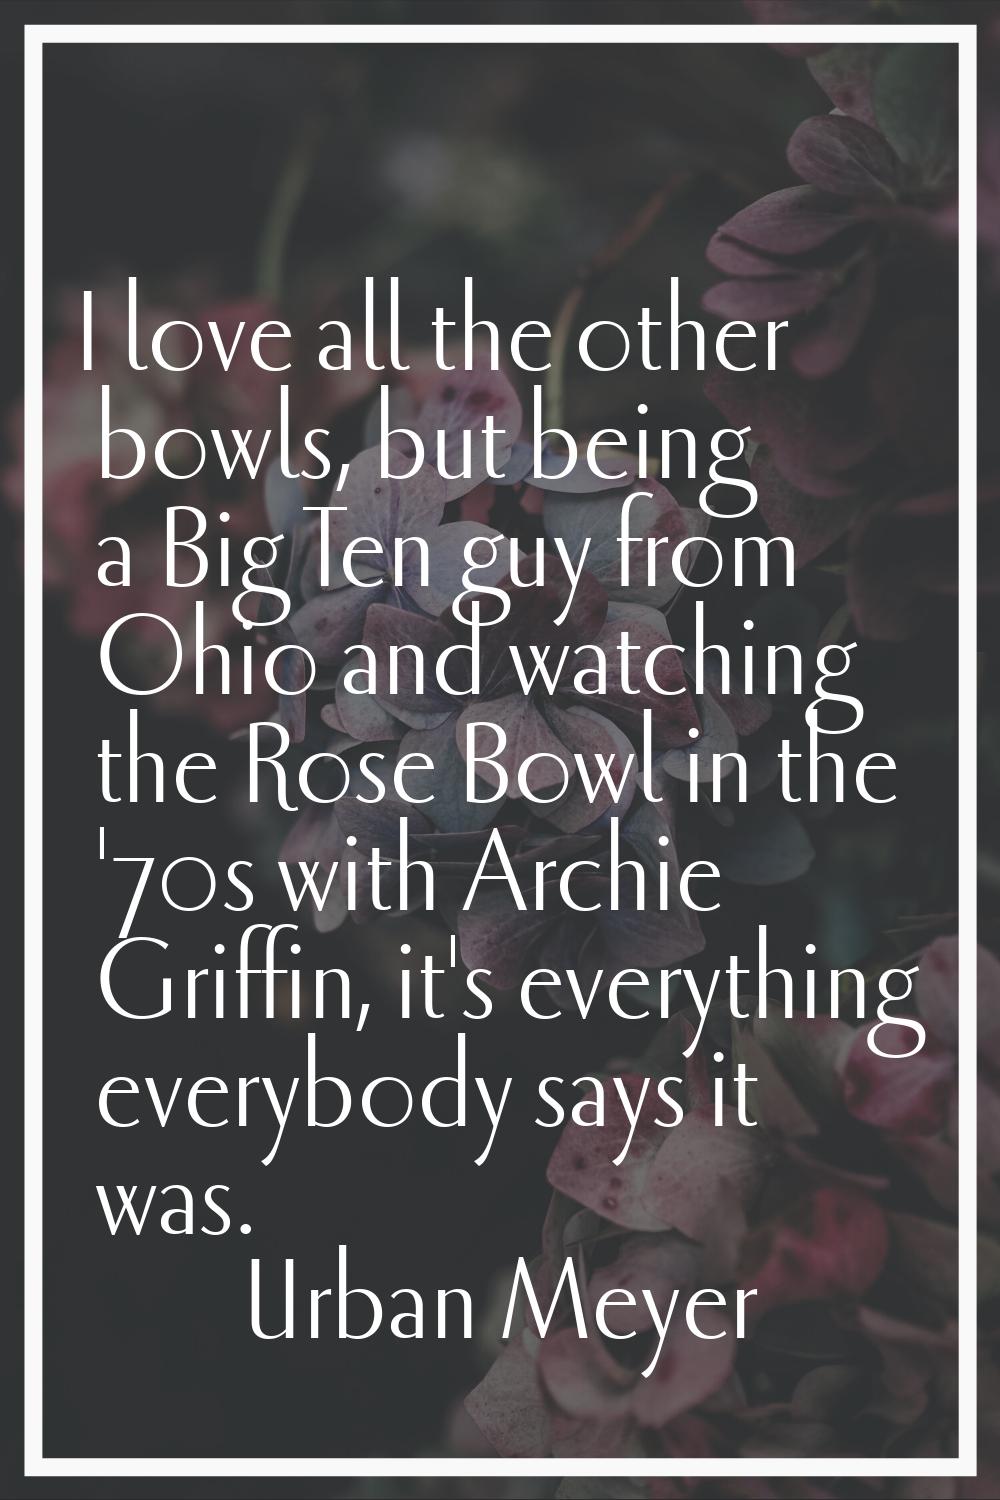 I love all the other bowls, but being a Big Ten guy from Ohio and watching the Rose Bowl in the '70